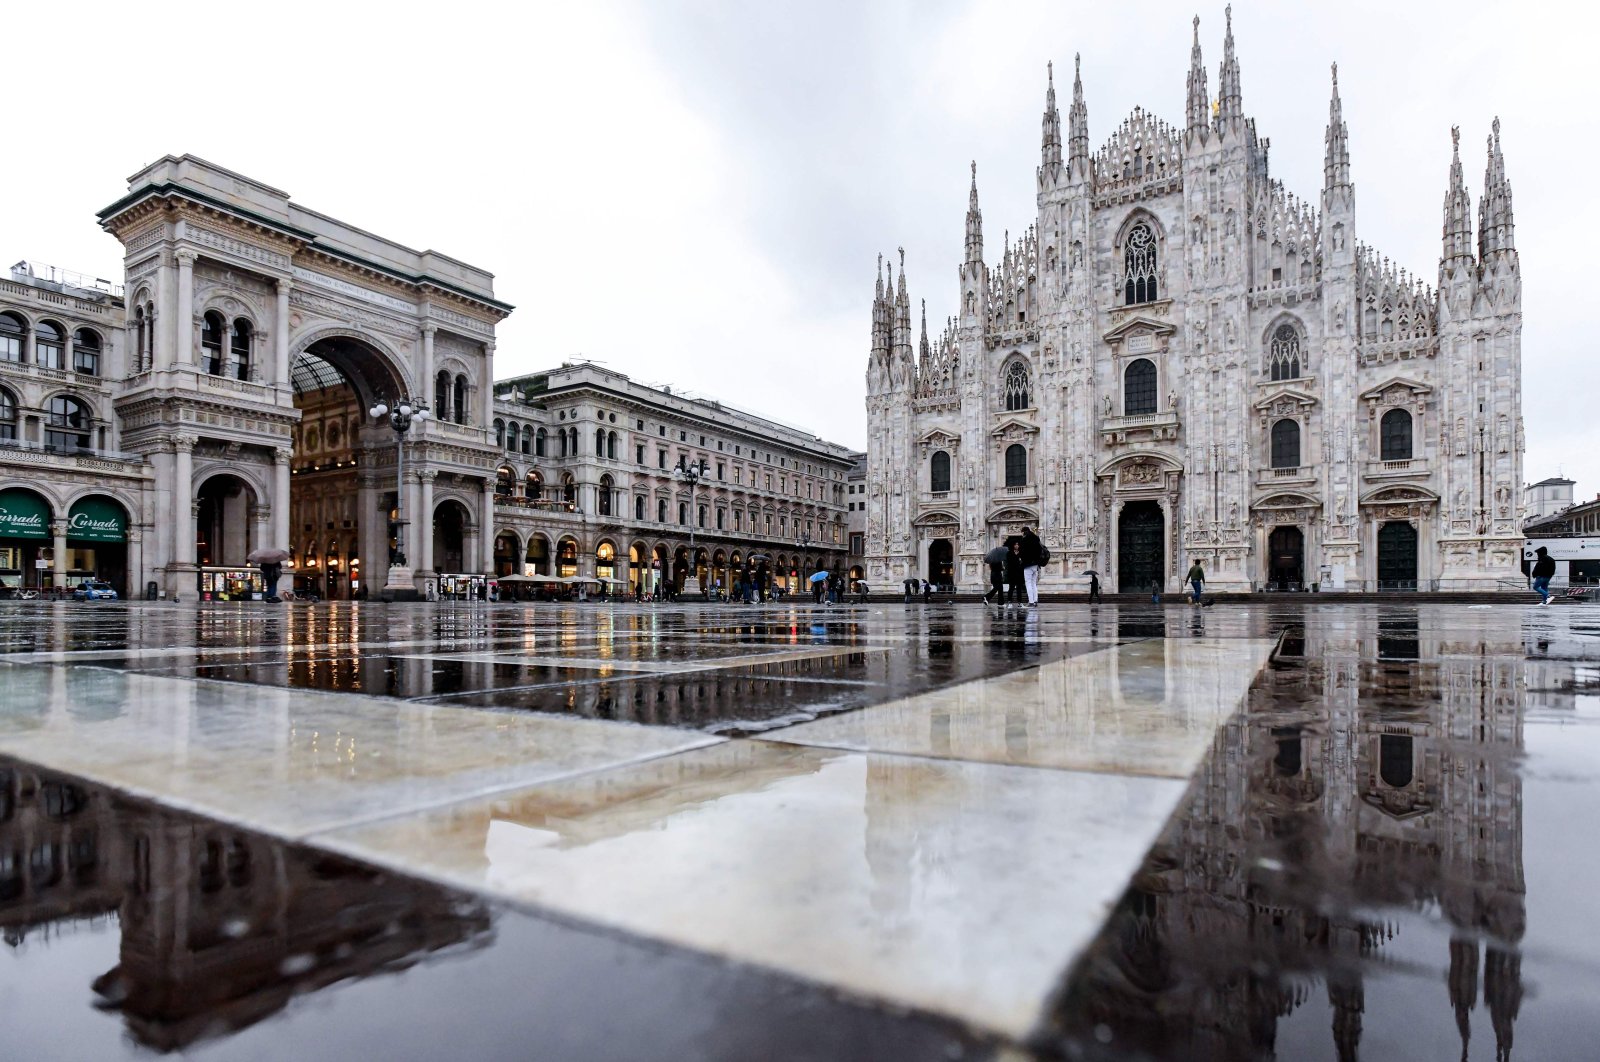 A picture shows the deserted Piazza Duomo in Milan, on March 5, 2020. (AFP Photo)